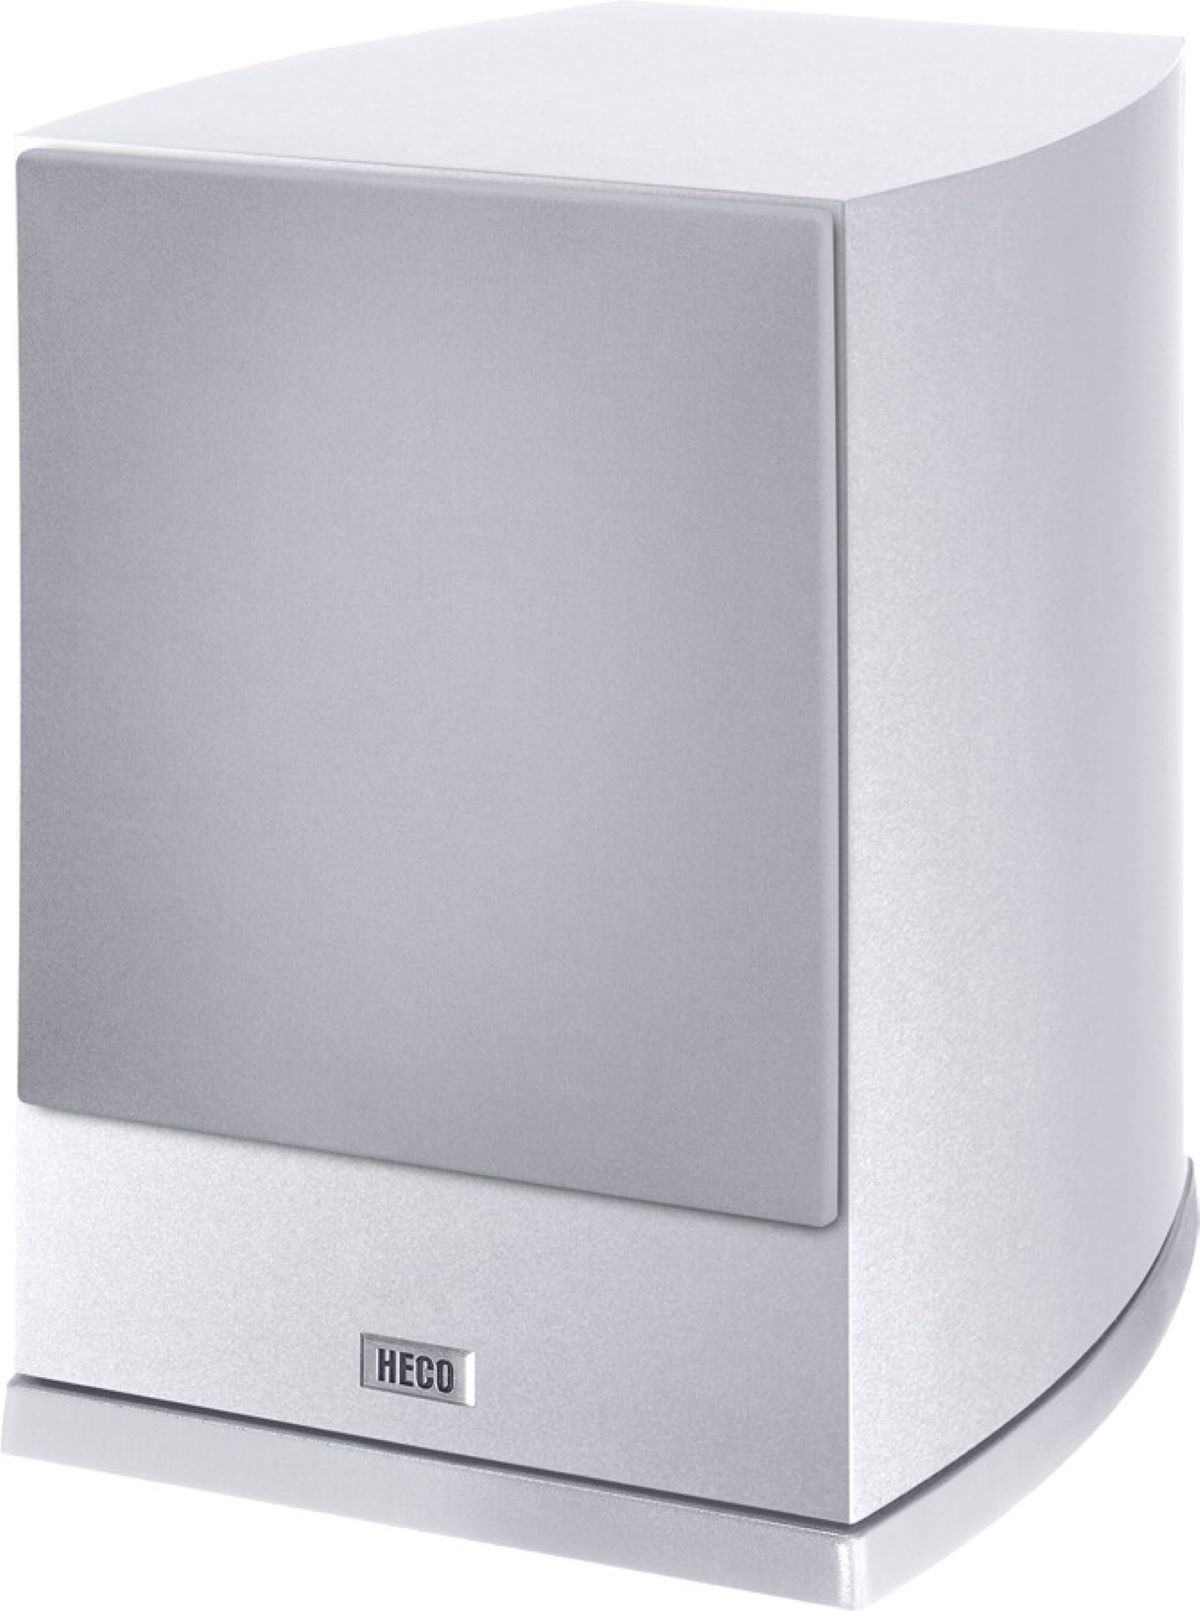 HECO 252A SUB VICTA weiss ELITE Subwoofer,